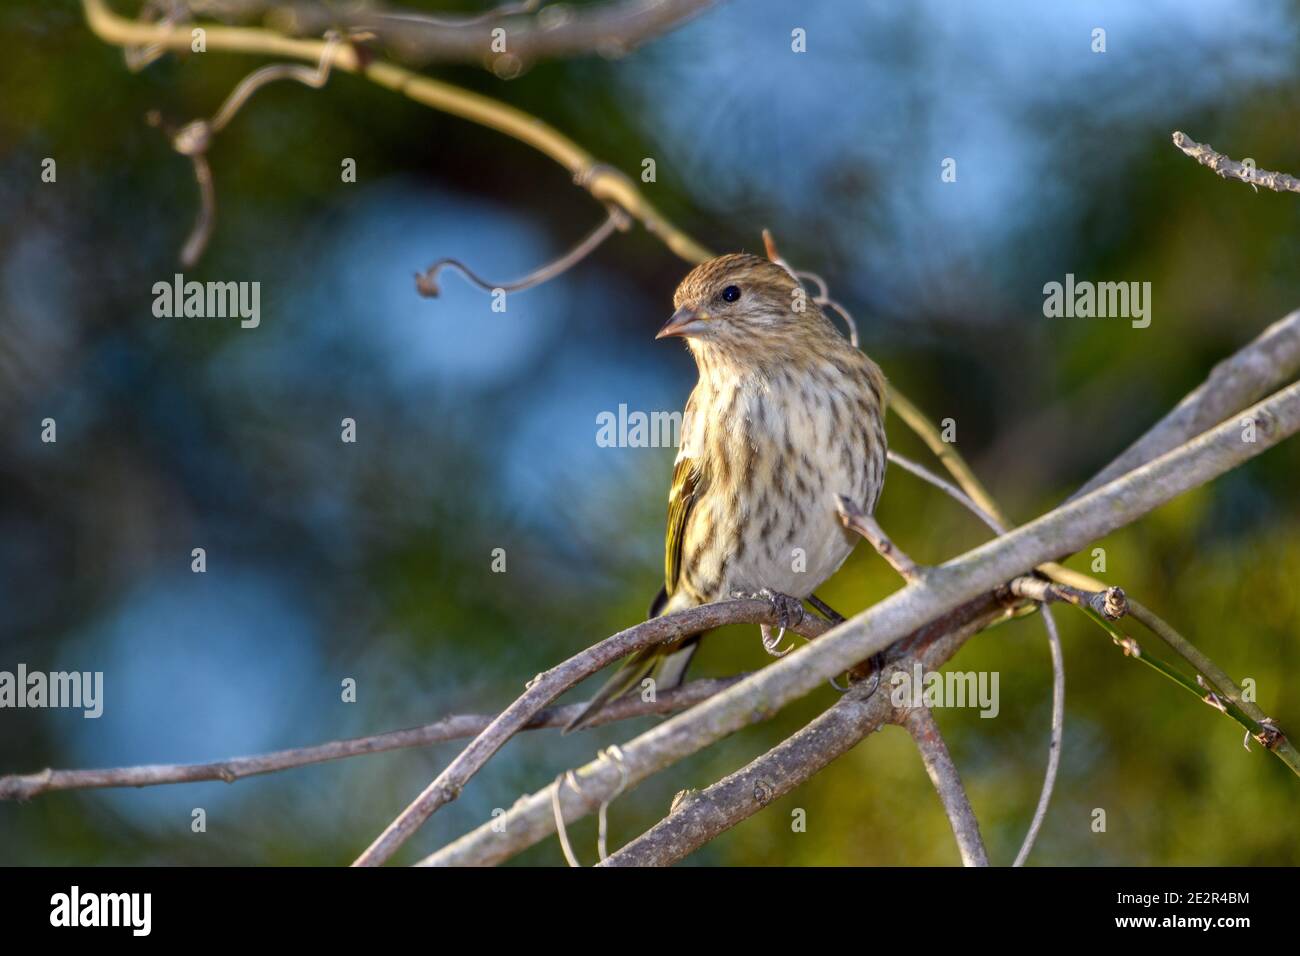 pine Siskin - Spinus pinus - perched on a branch. green foliage background Stock Photo